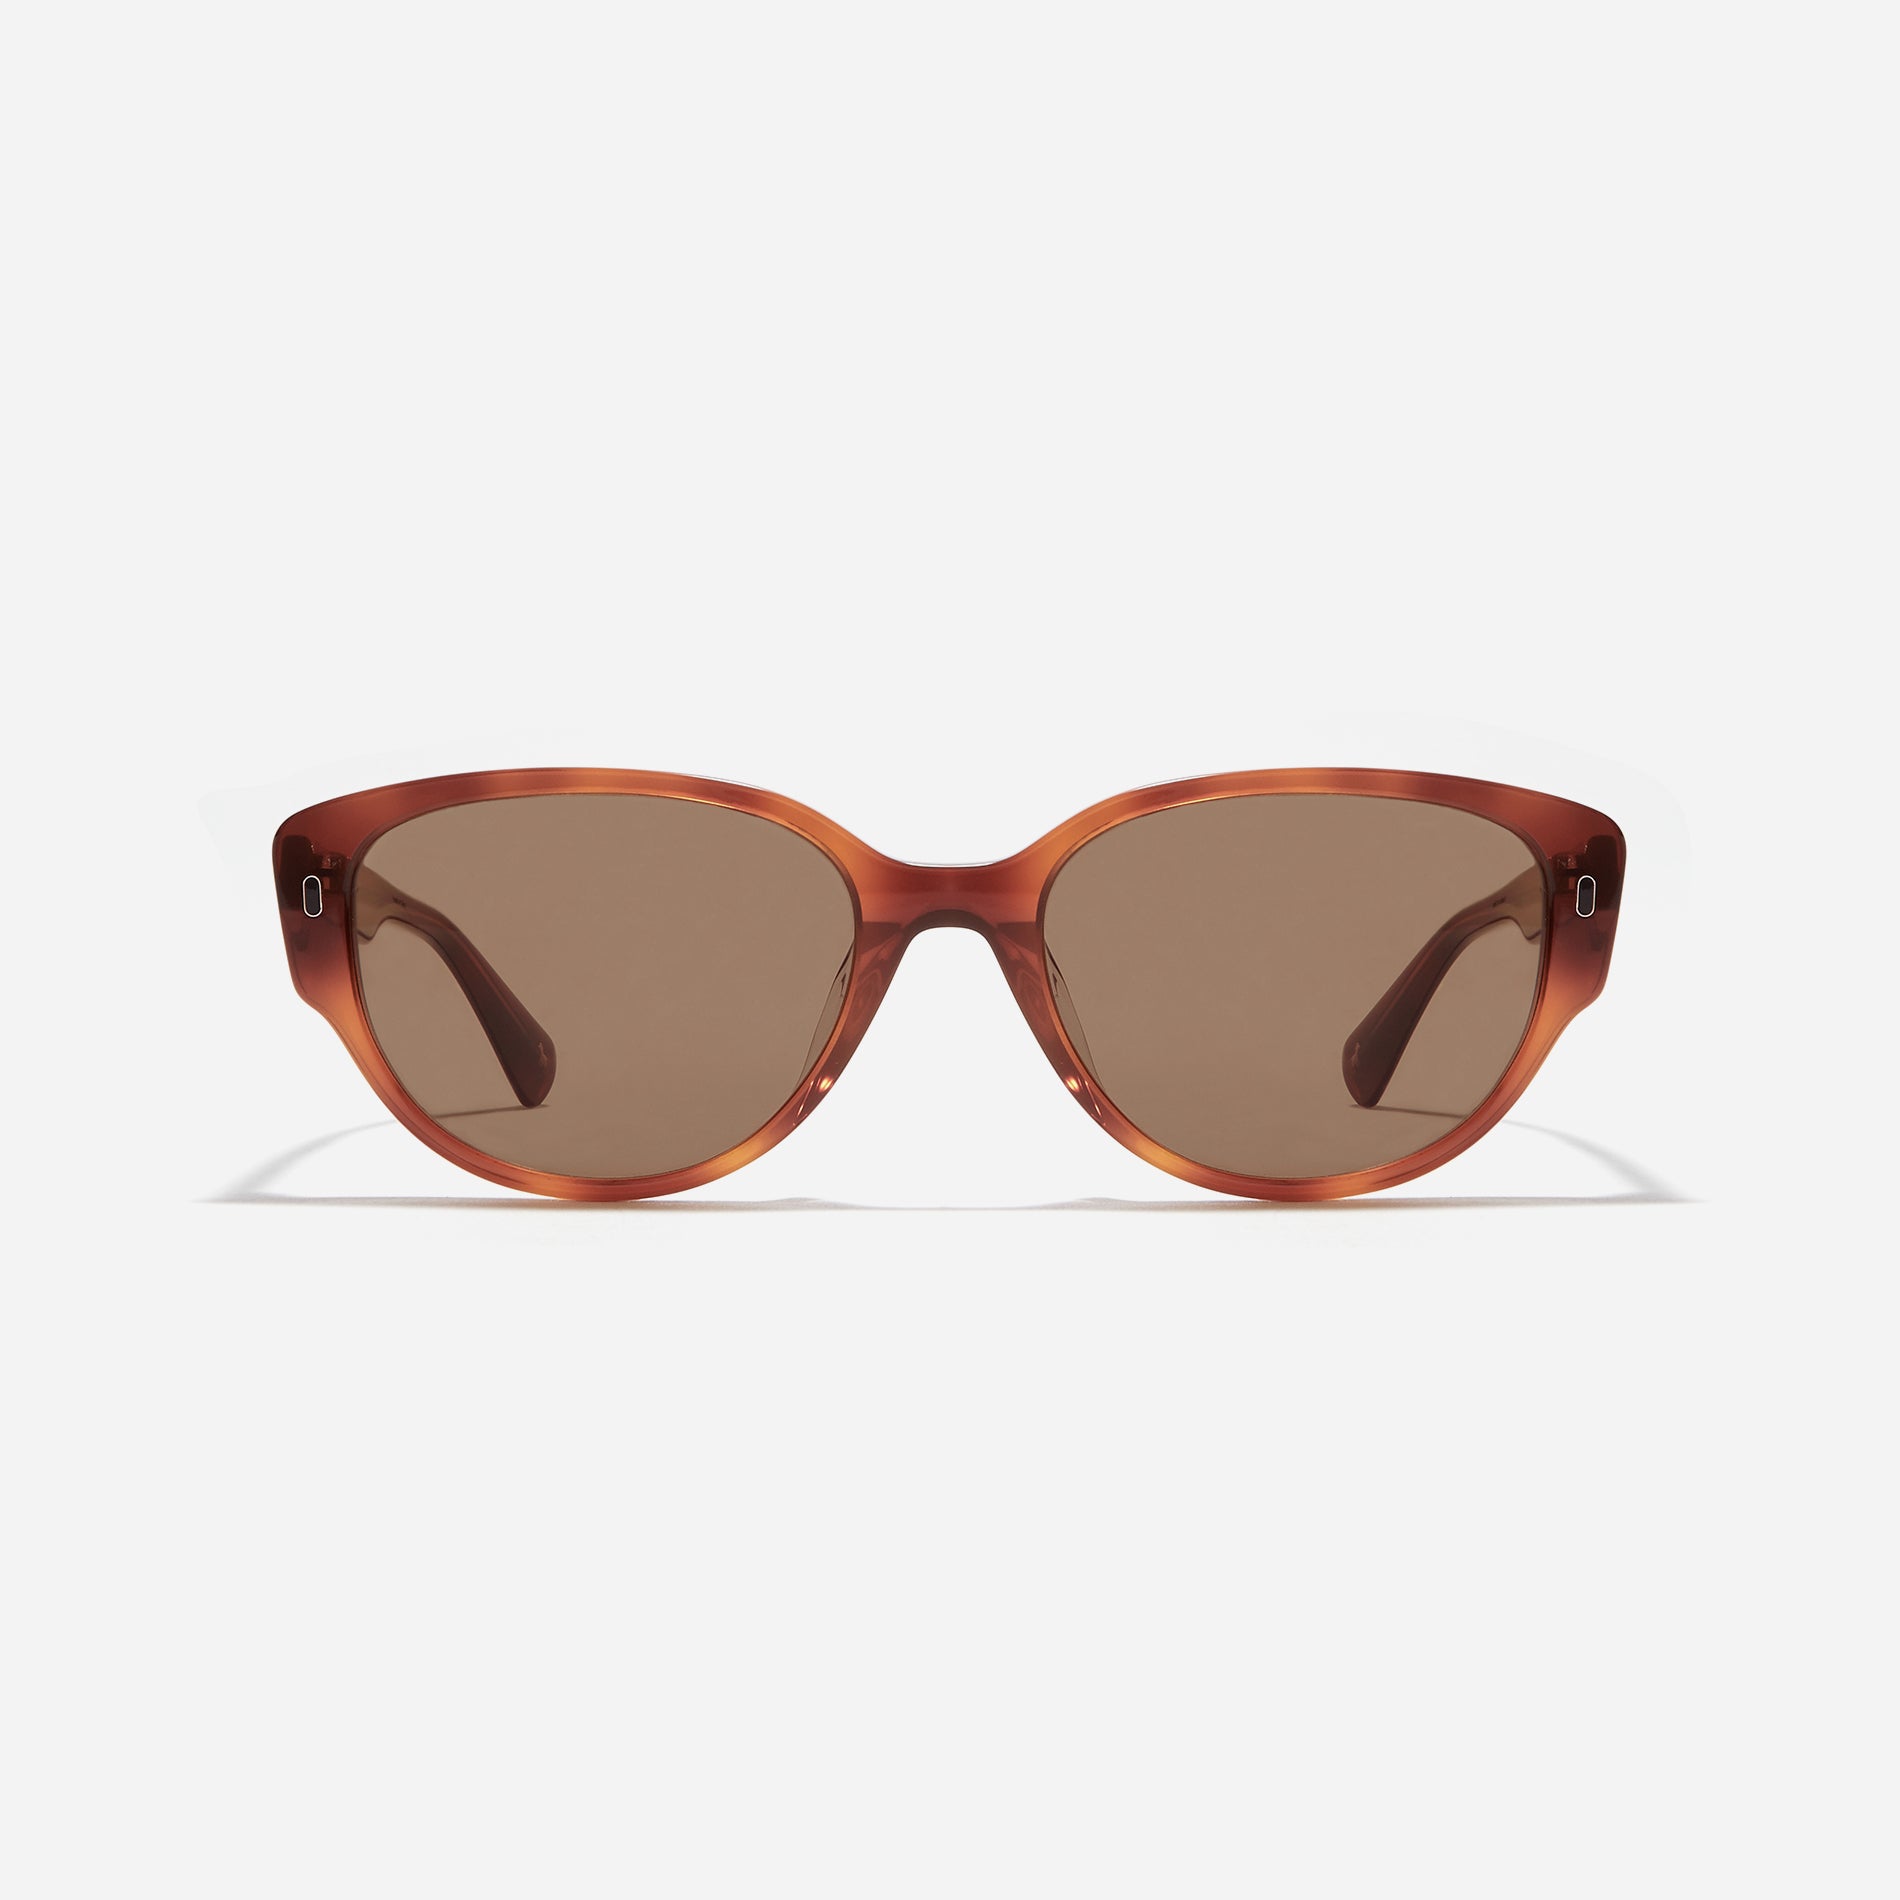 Round-shaped petite frame sunglasses designed with a stylish  narrow rim style and eye-catching color variations.